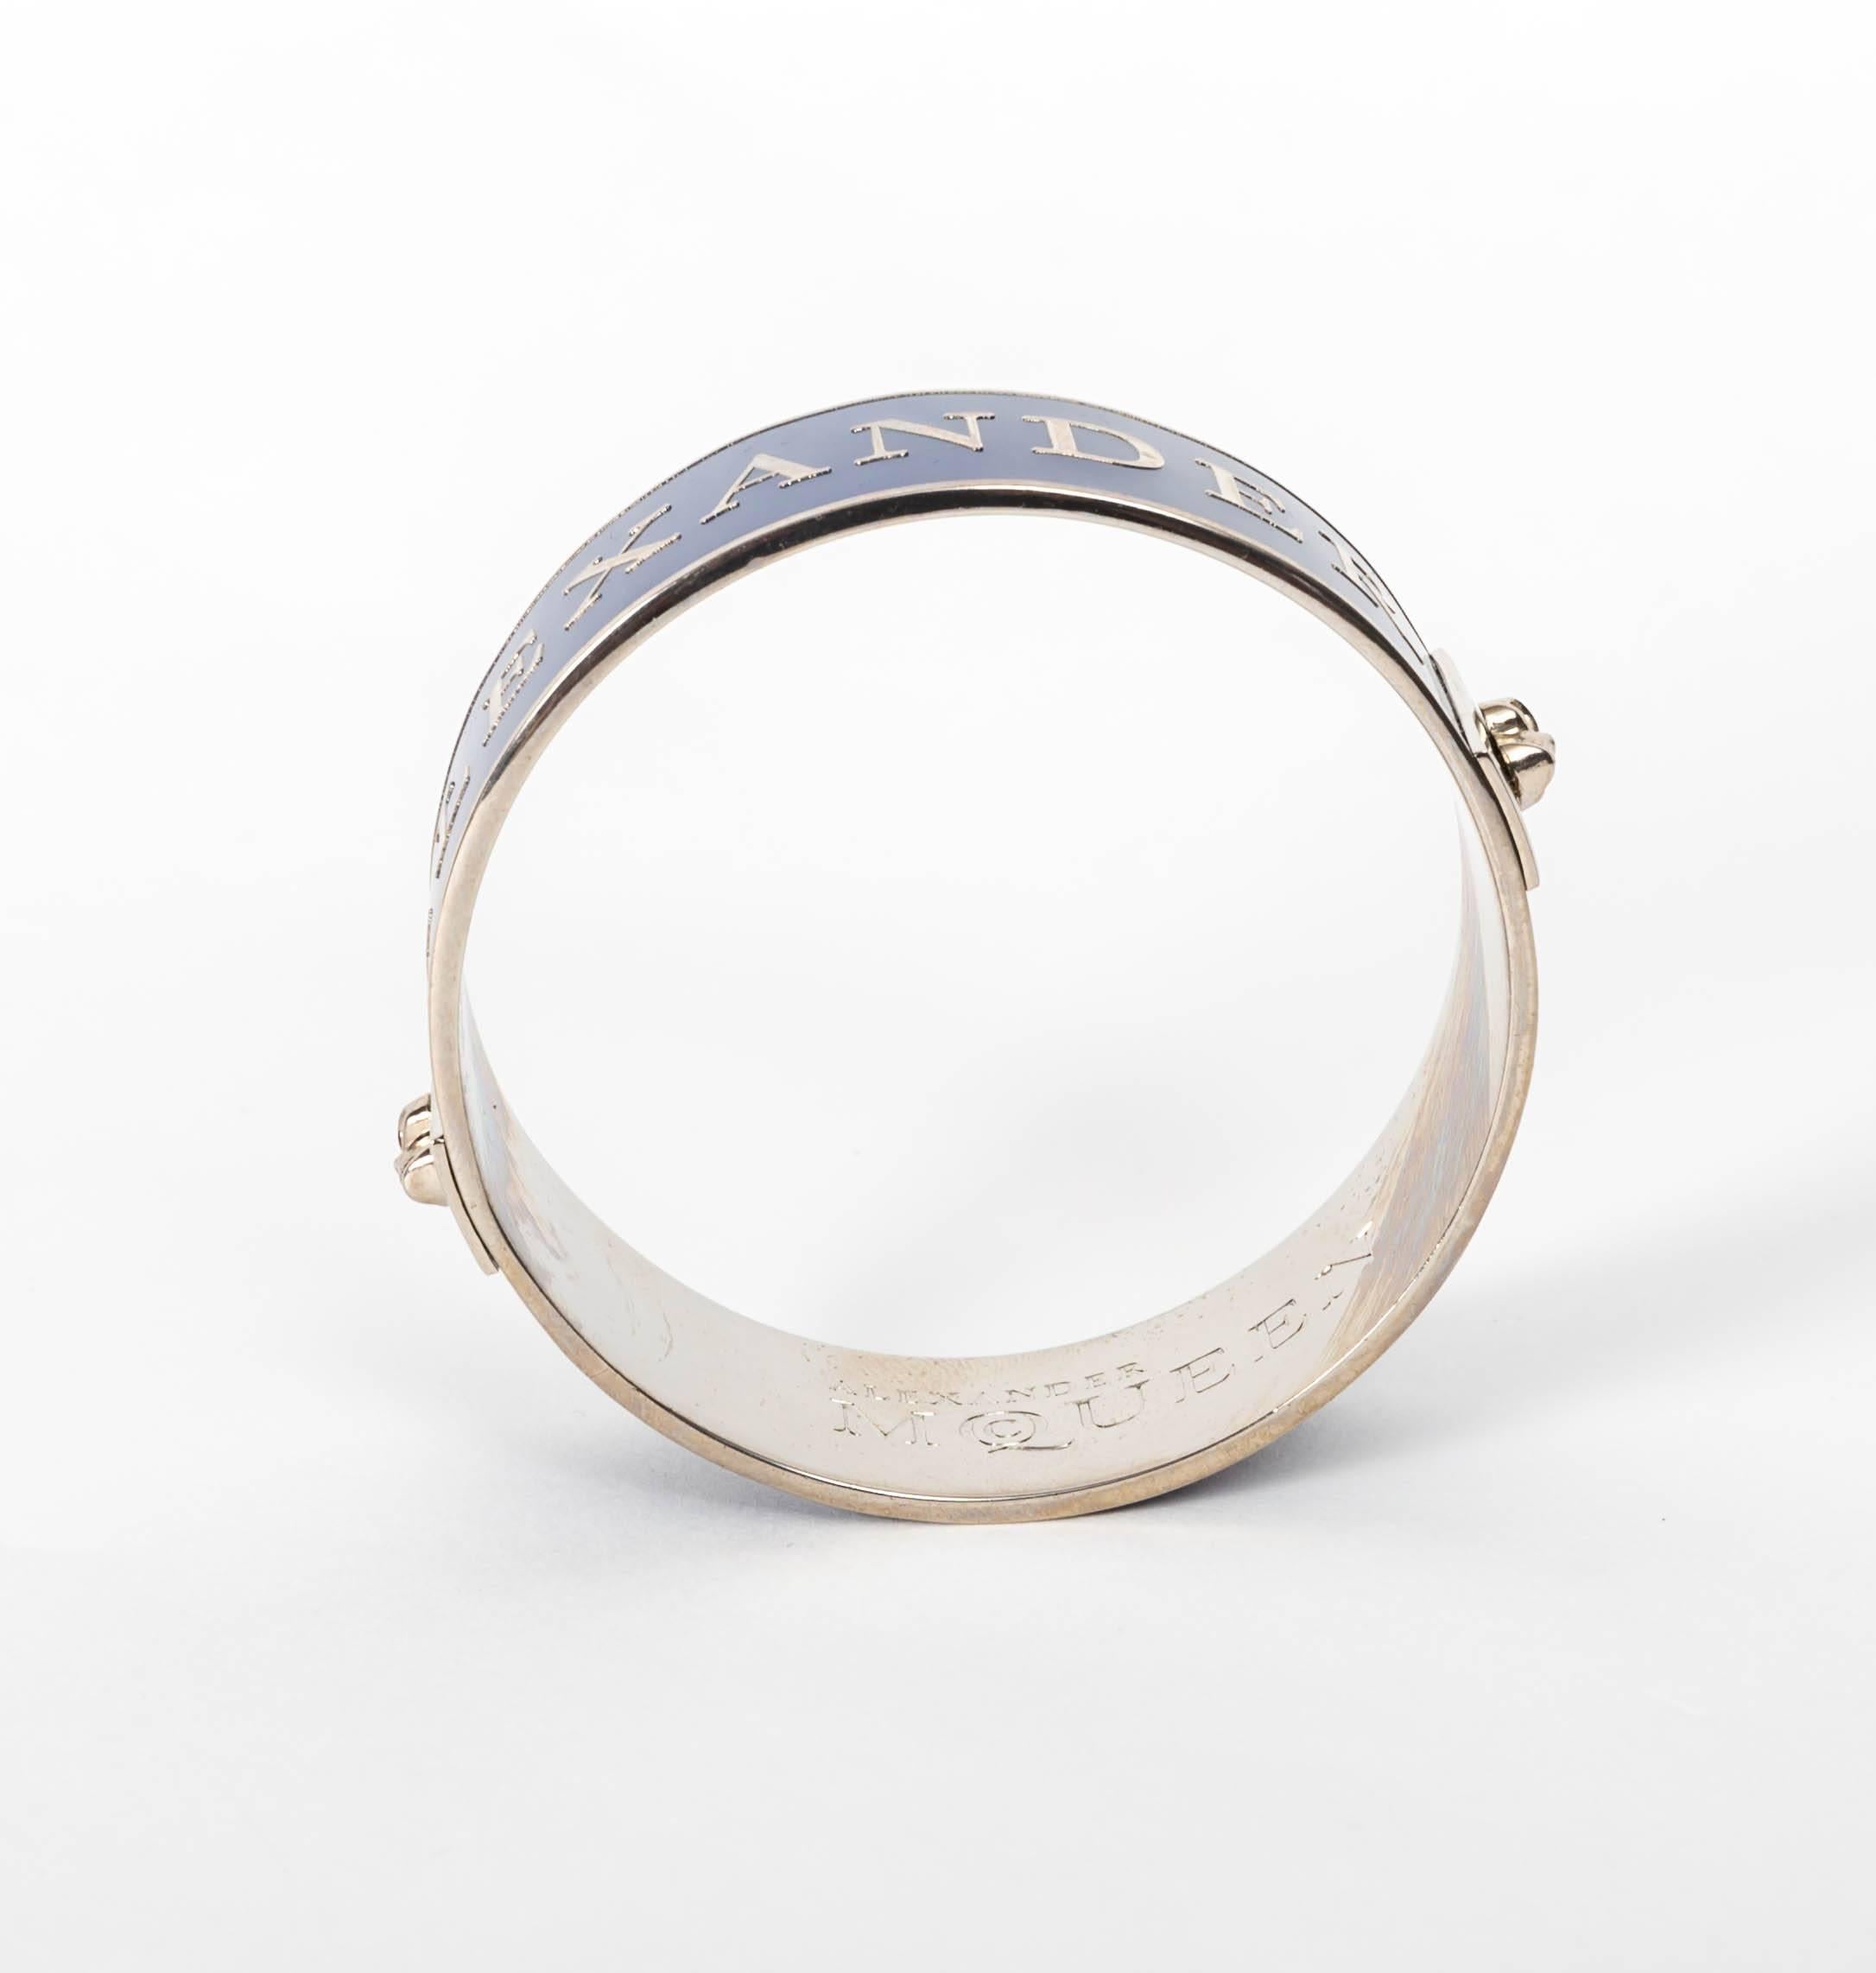 Women's or Men's Alexander McQueen Cuff in Navy Blue With Raised Silver Lettering